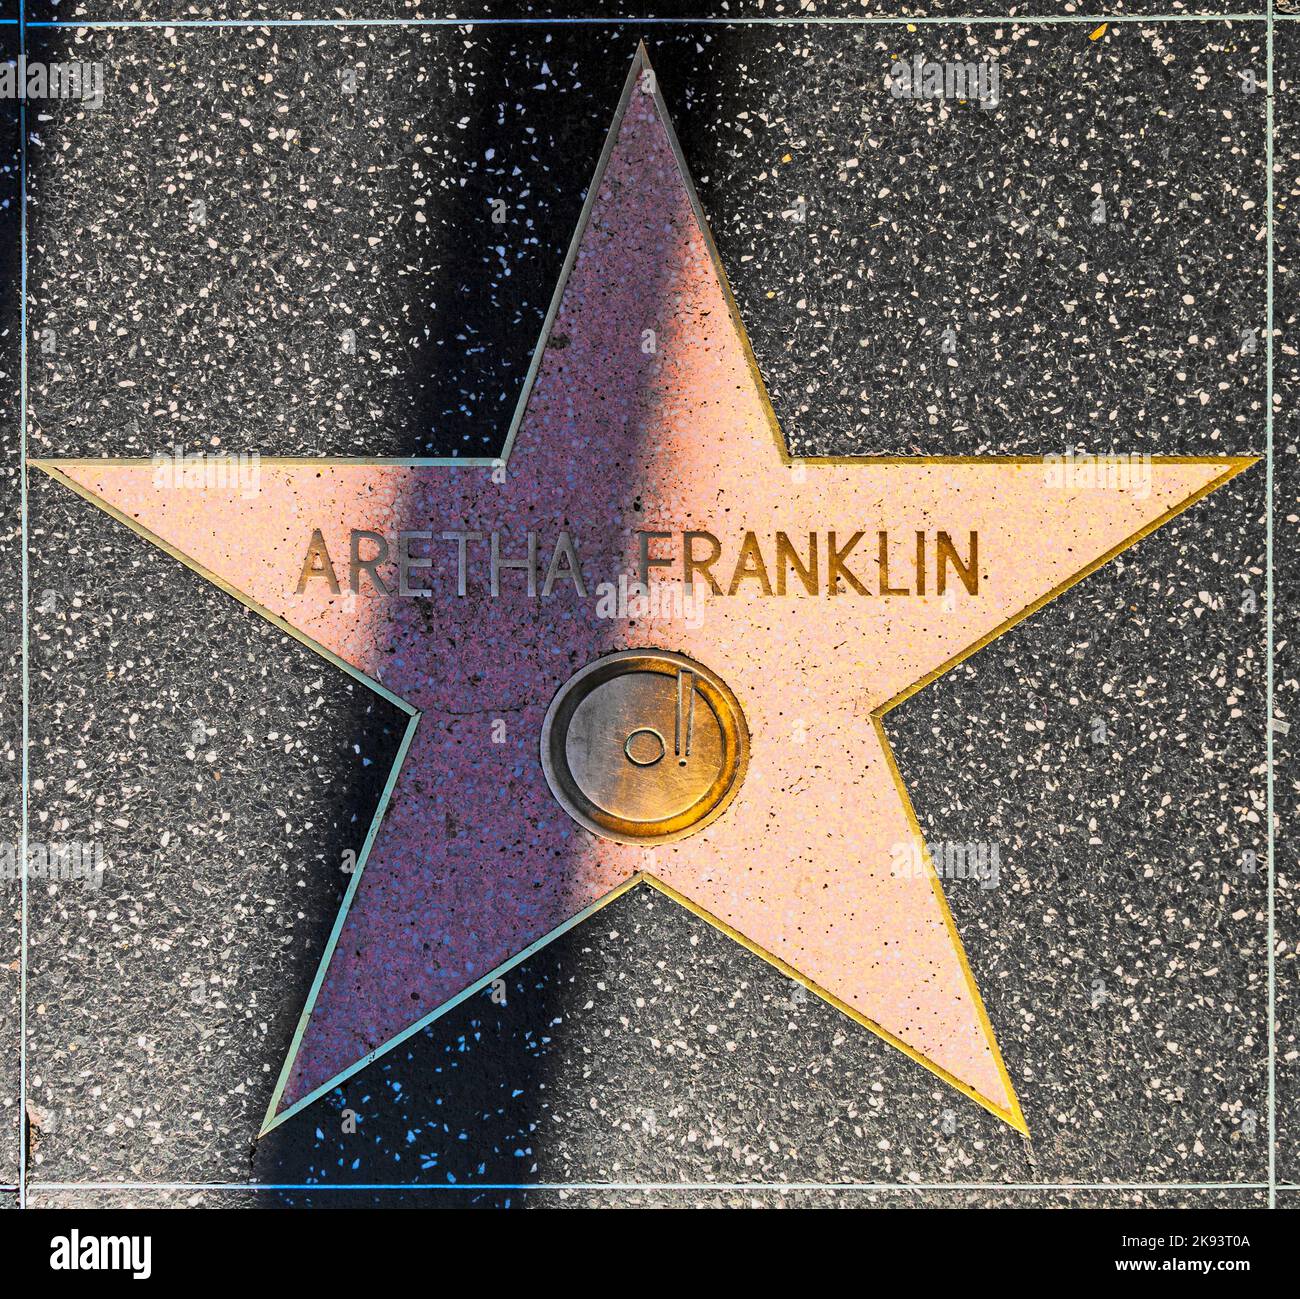 HOLLYWOOD - JUNE 24: Aretha Franklin's star on Hollywood Walk of Fame on June 24, 2012 in Hollywood, California. This star is located on Hollywood Blv Stock Photo